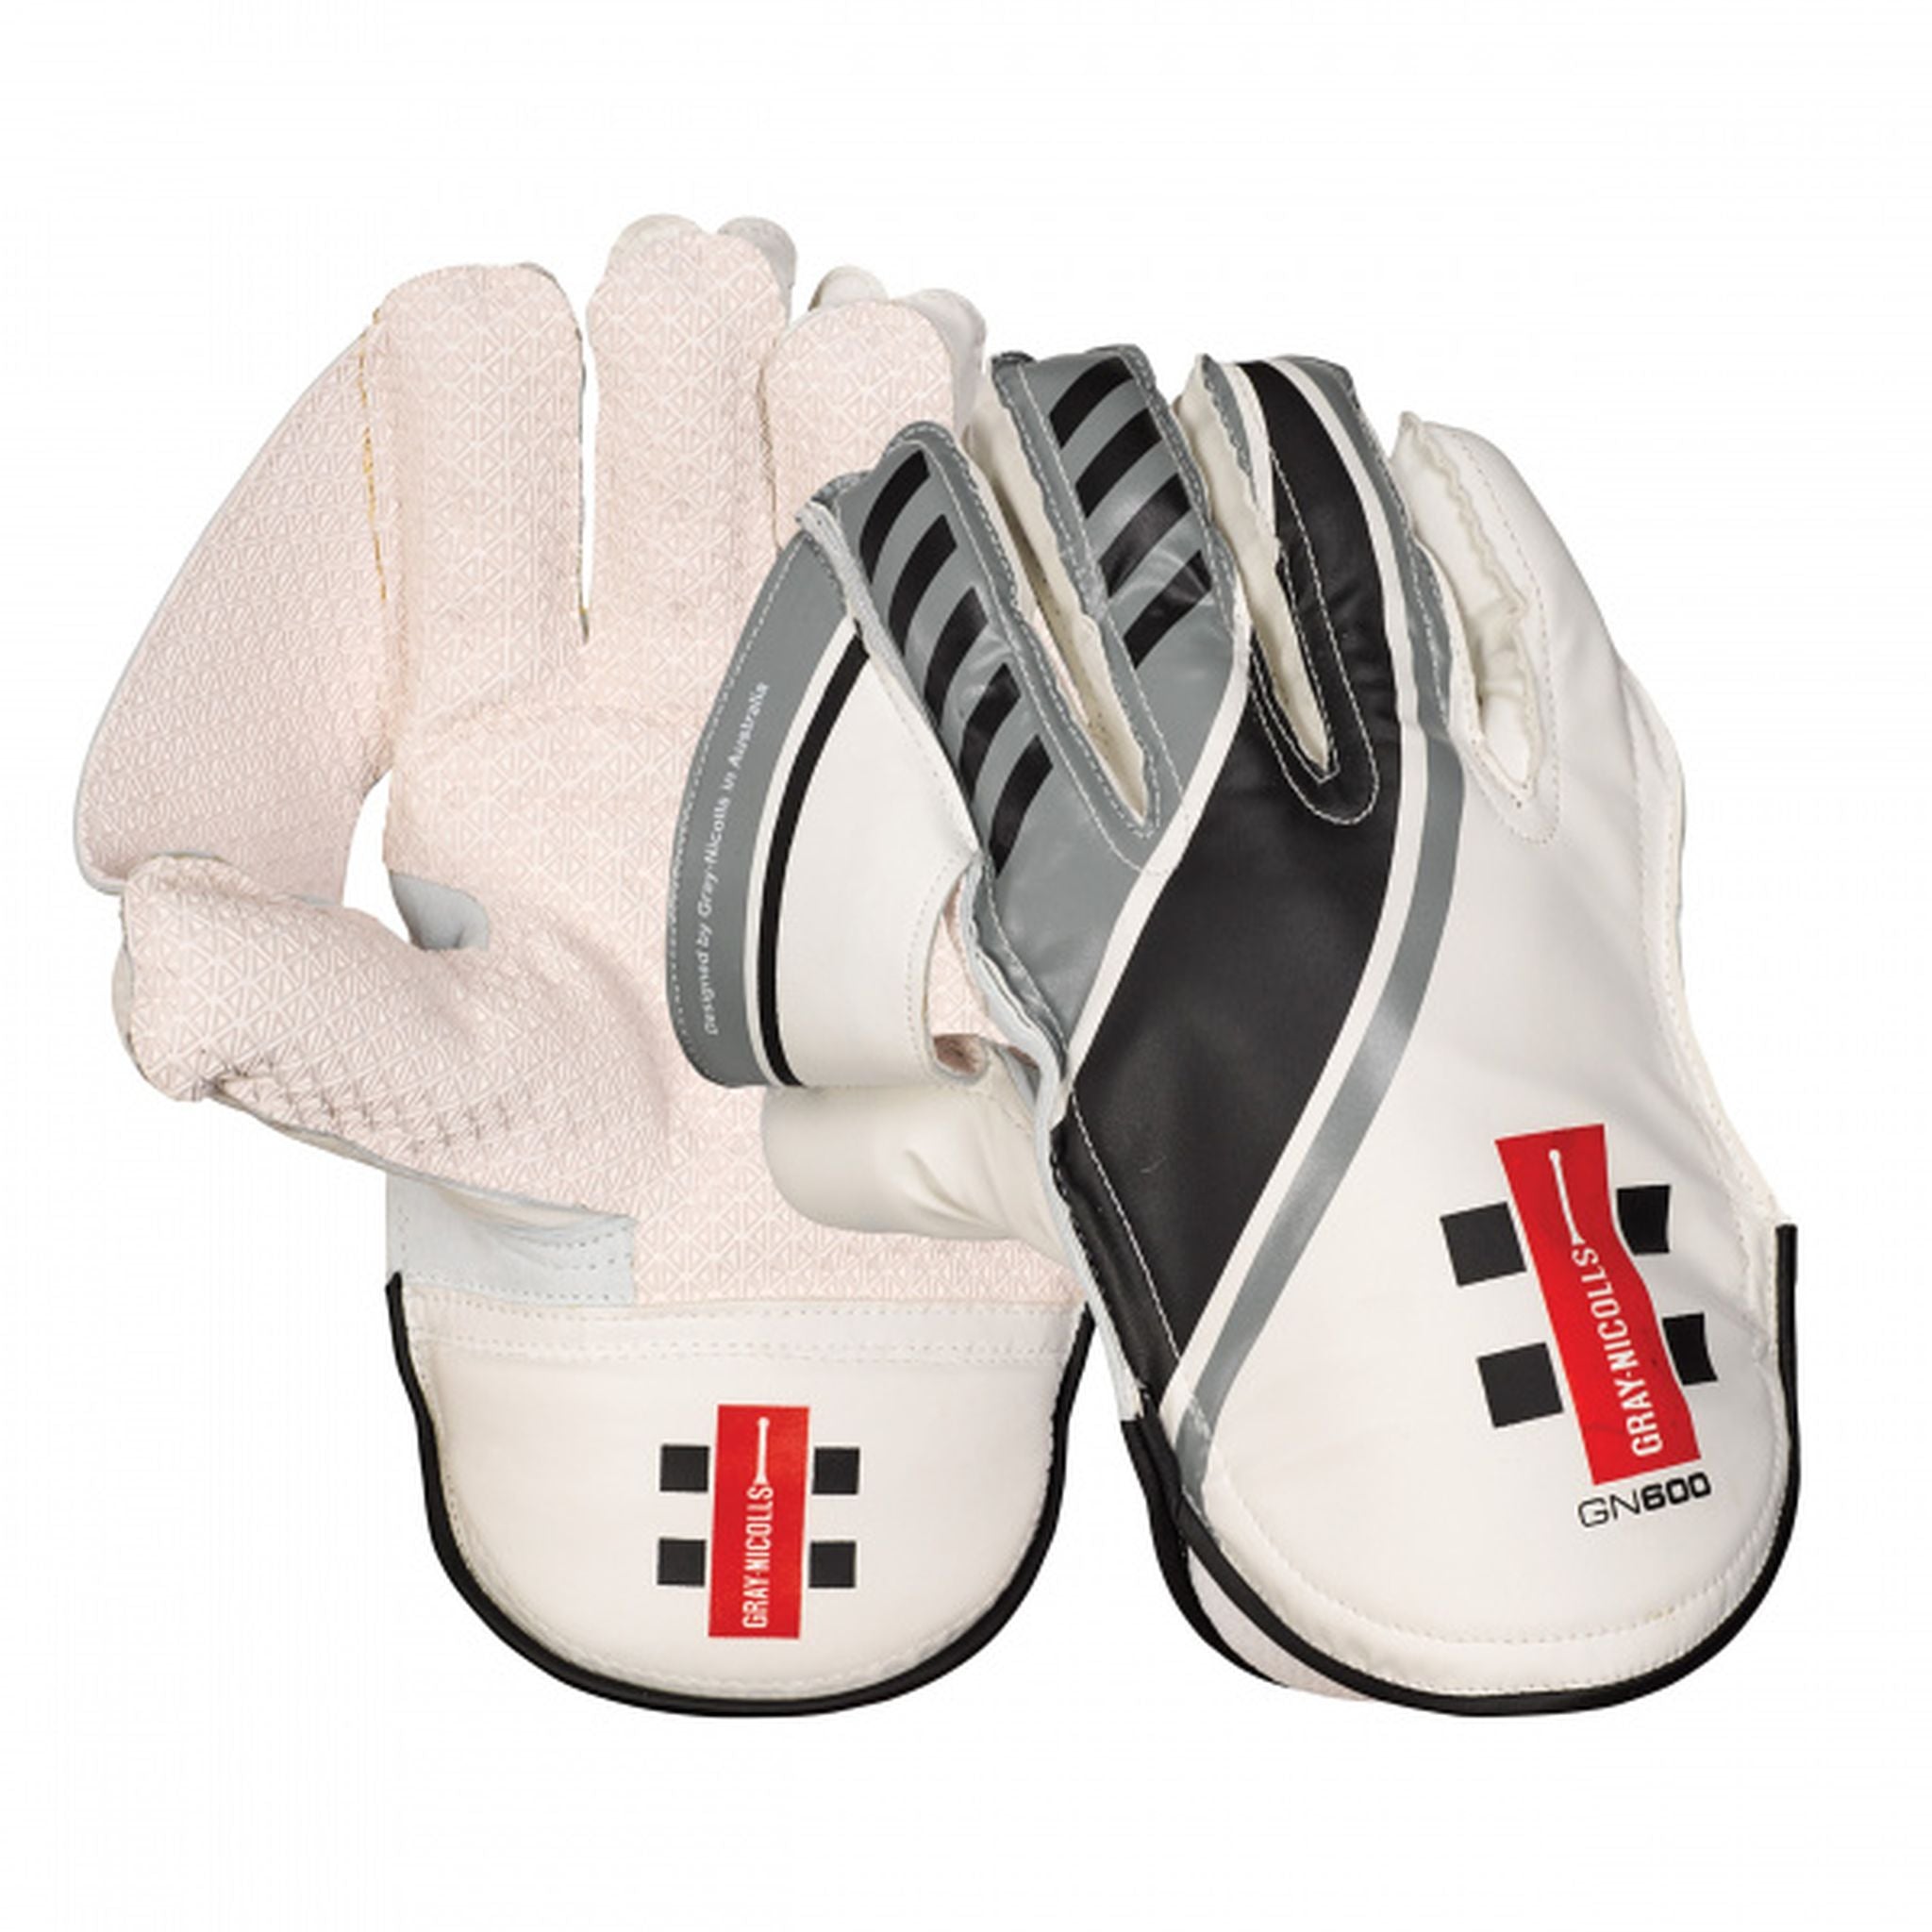 Gray-Nicolls GN 600 Adults Wicket Keeping Gloves